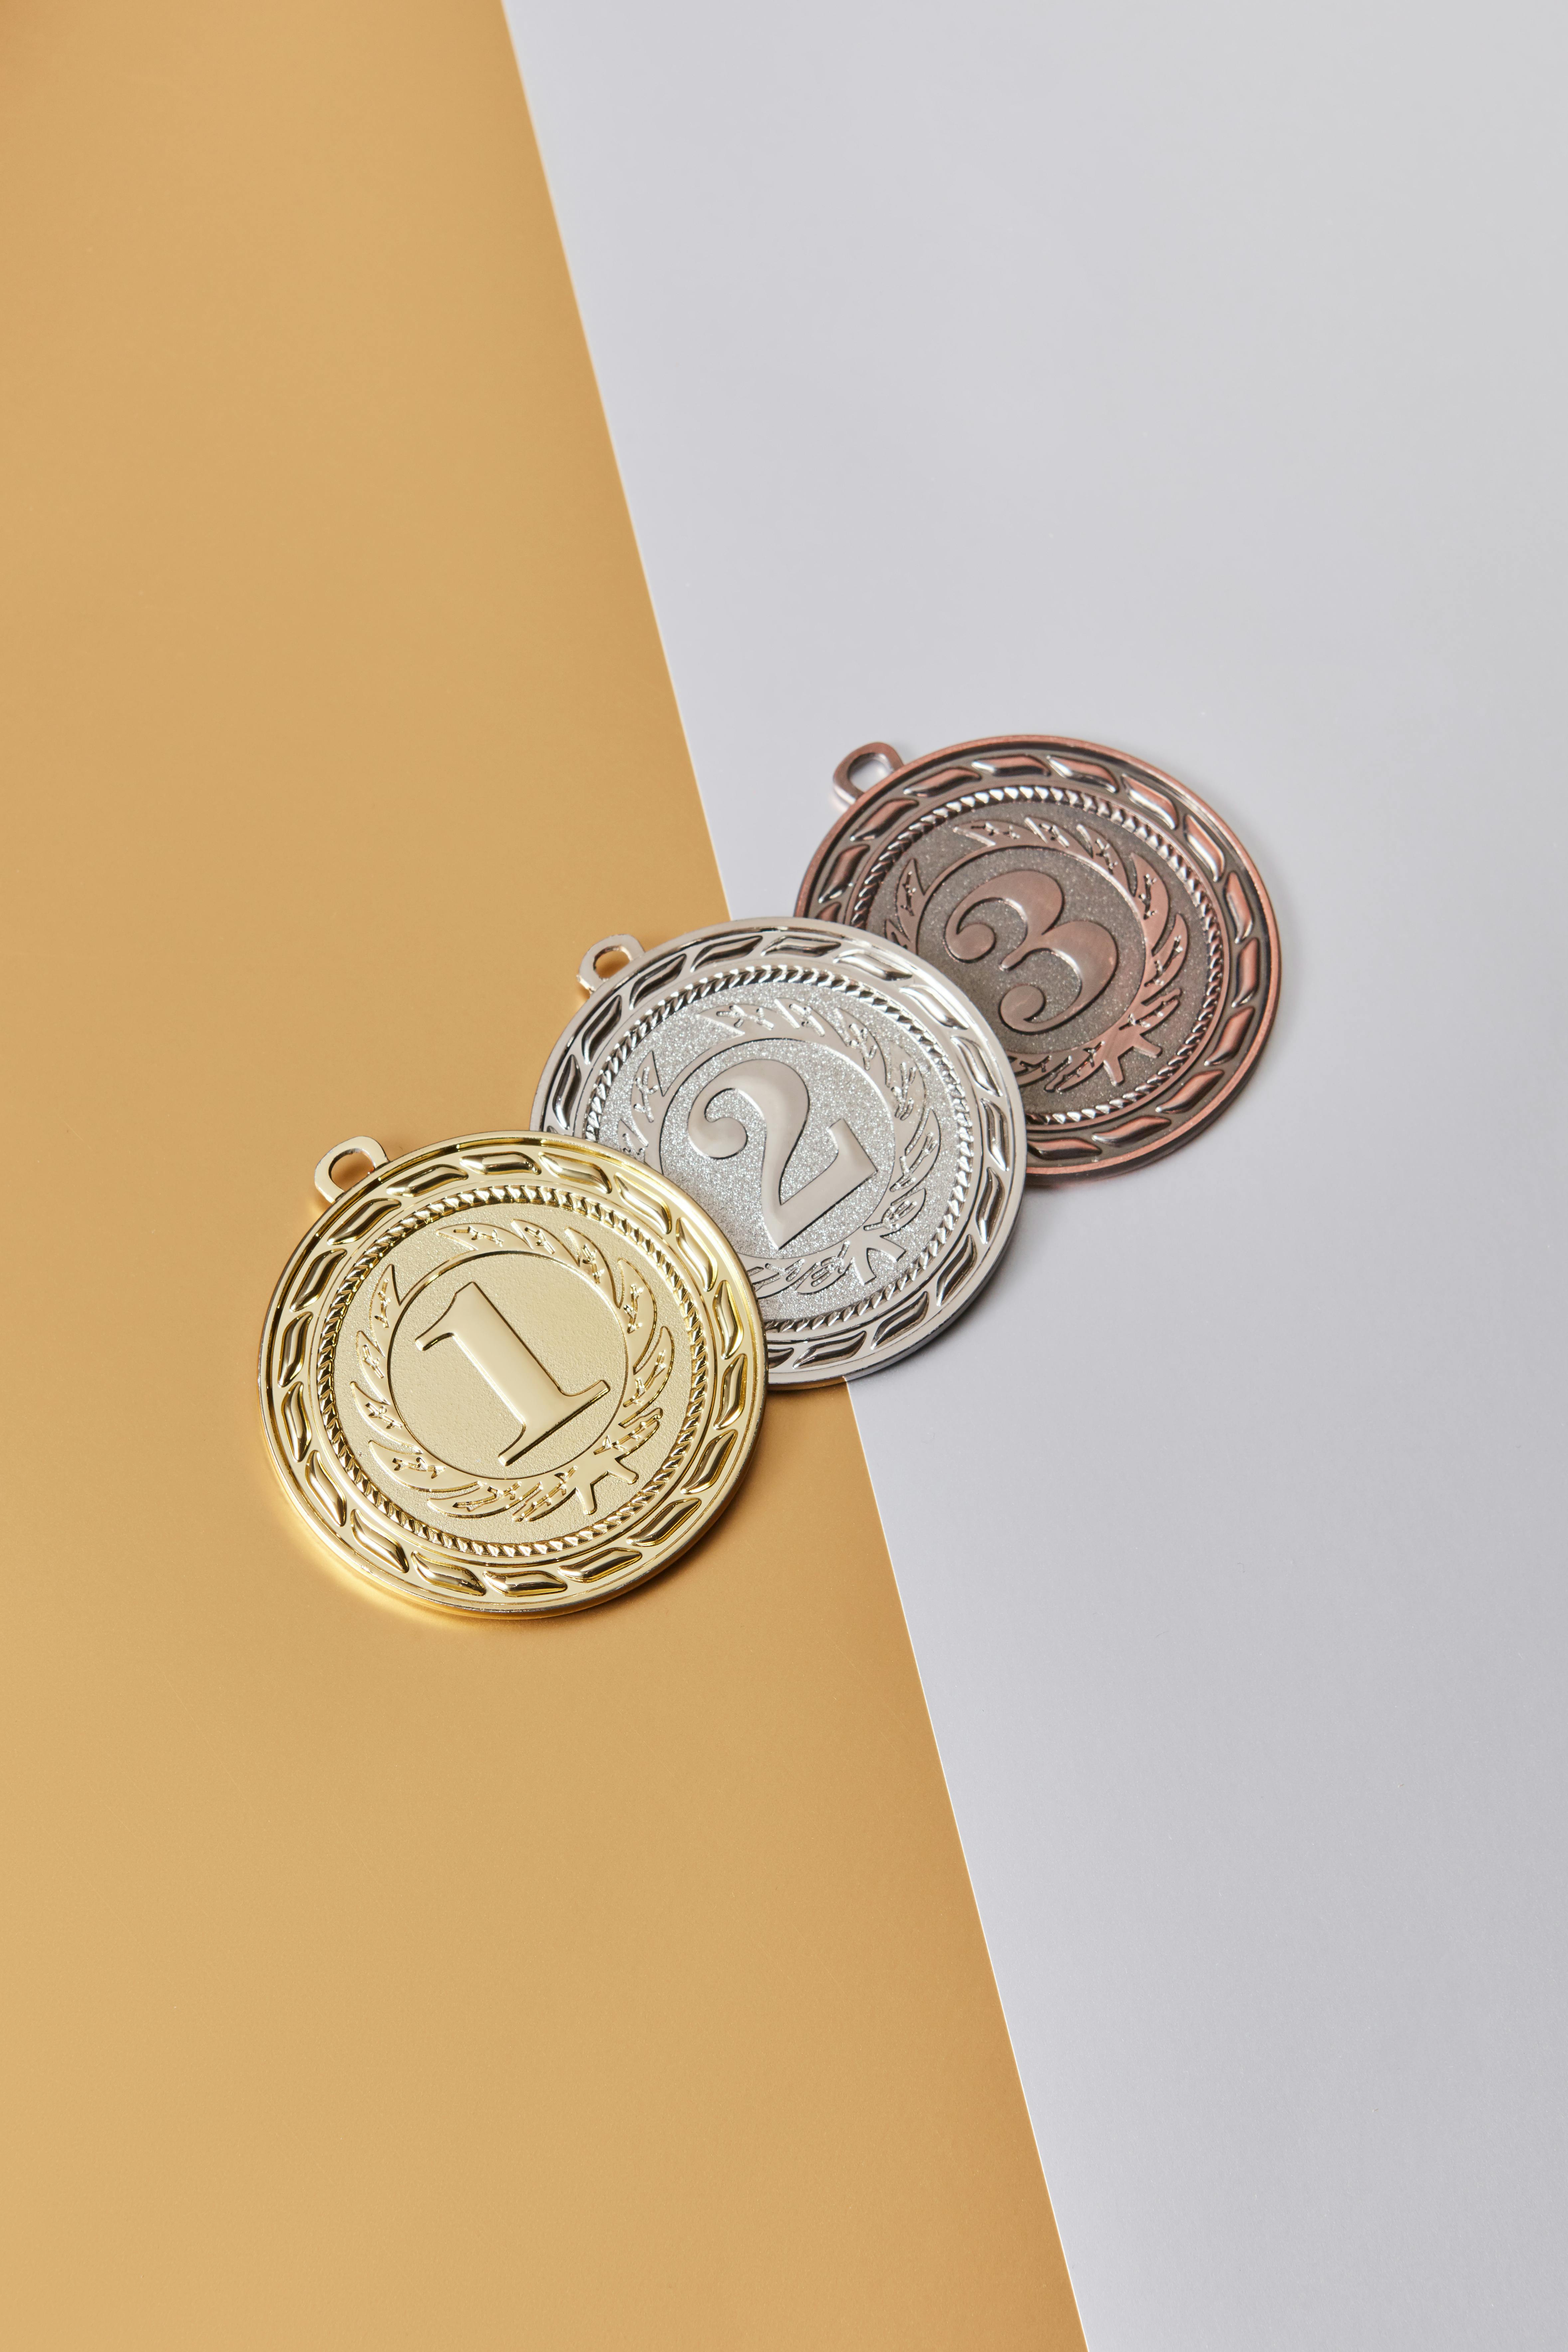 Bronze Silver and Gold Medals